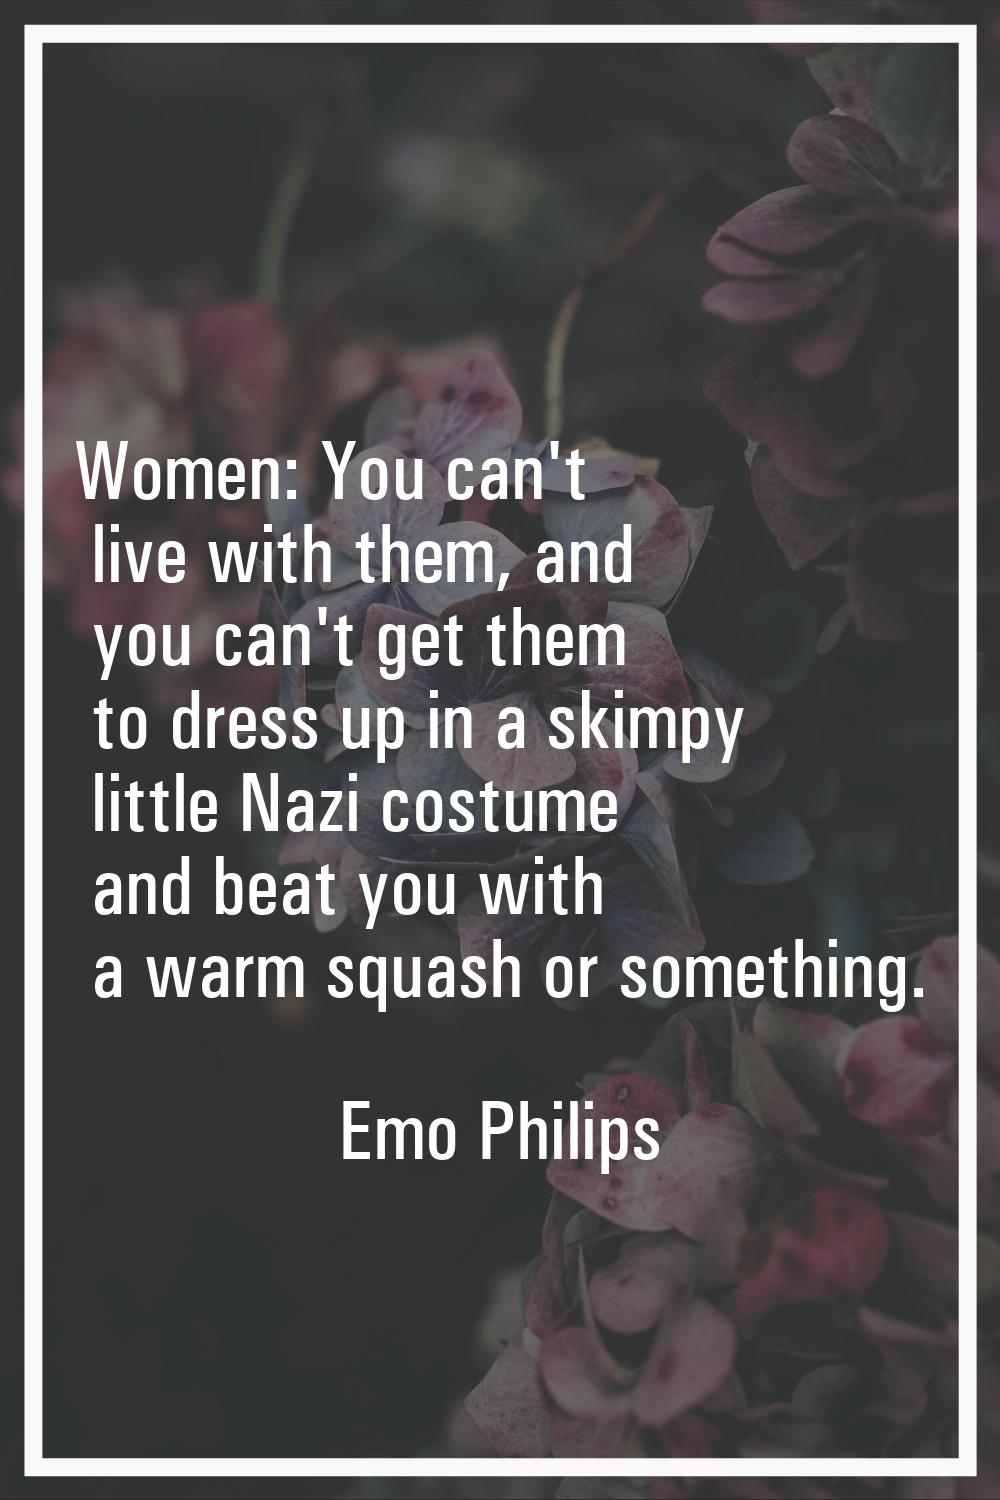 Women: You can't live with them, and you can't get them to dress up in a skimpy little Nazi costume